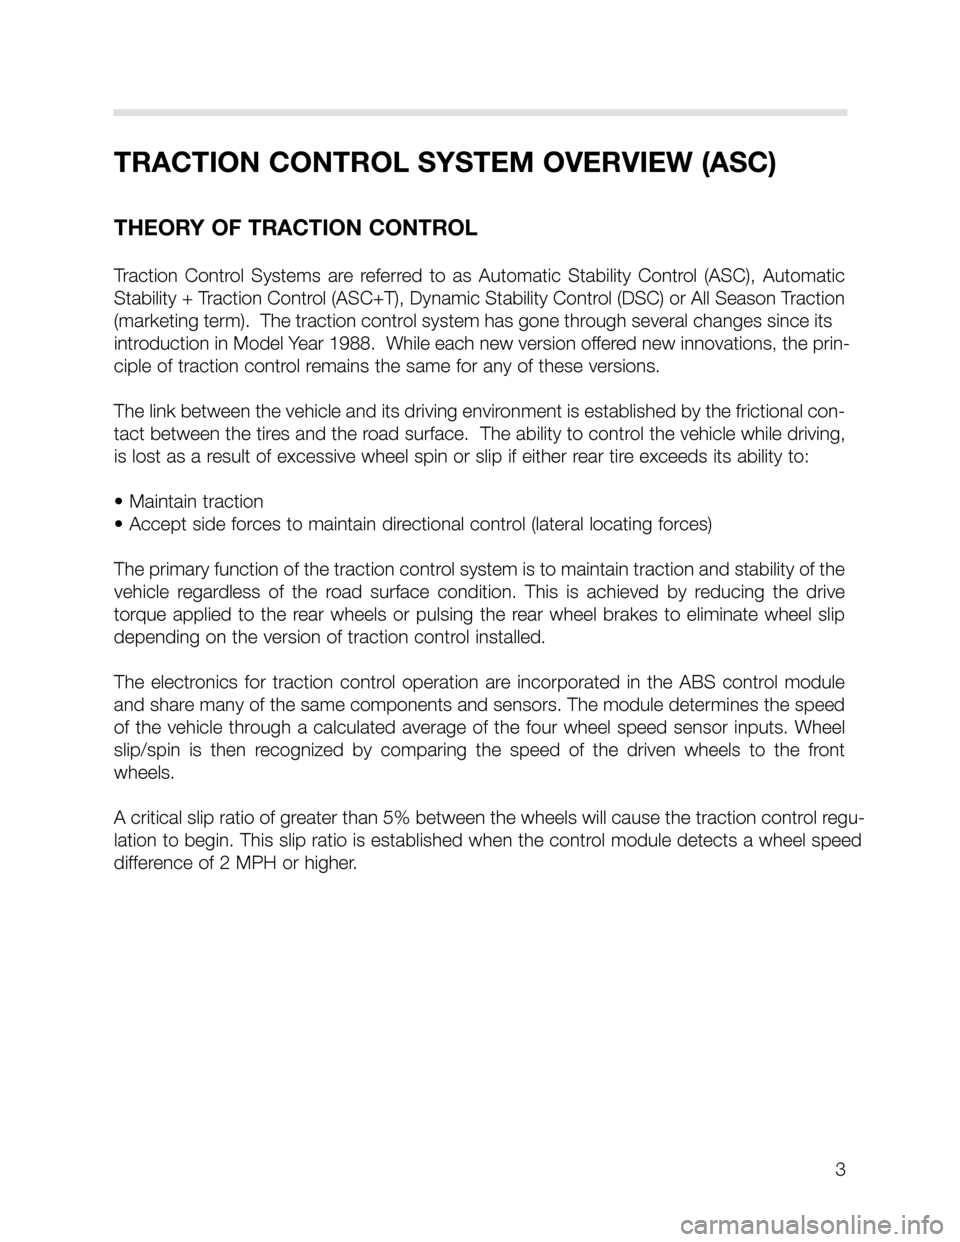 BMW X5 2005 E53 DSC System Workshop Manual 3
TRACTION CONTROL SYSTEM OVERVIEW (ASC)
THEORY OF TRACTION CONTROL
Traction  Control  Systems  are  referred  to  as  Automatic  Stability  Control  (ASC),  Automatic
Stability + Traction Control (AS